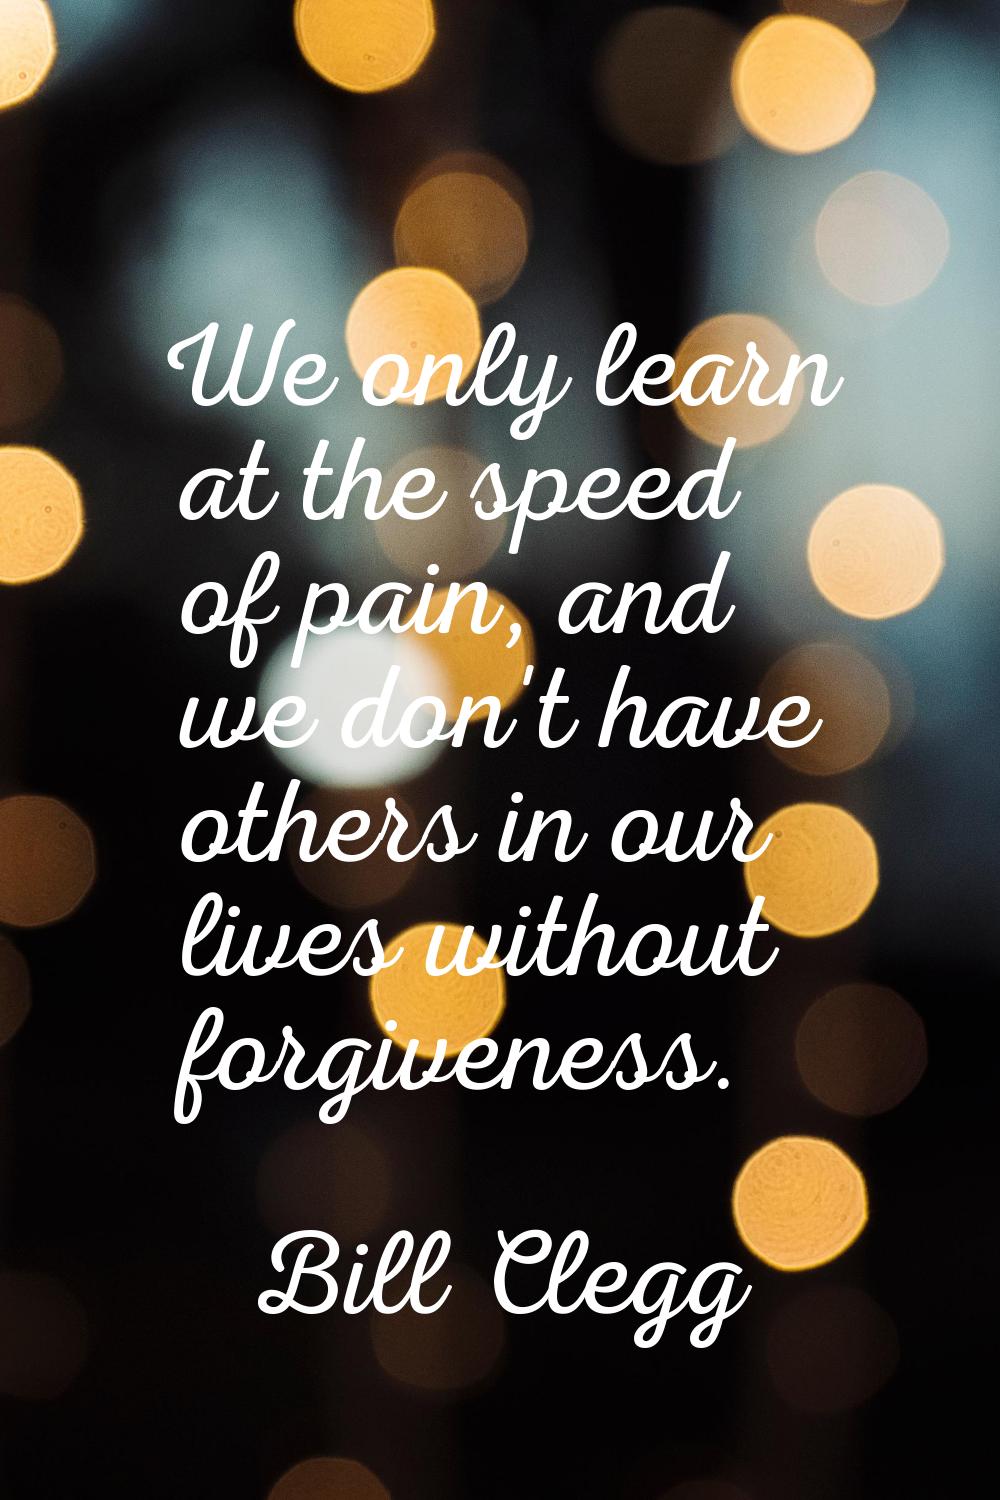 We only learn at the speed of pain, and we don't have others in our lives without forgiveness.